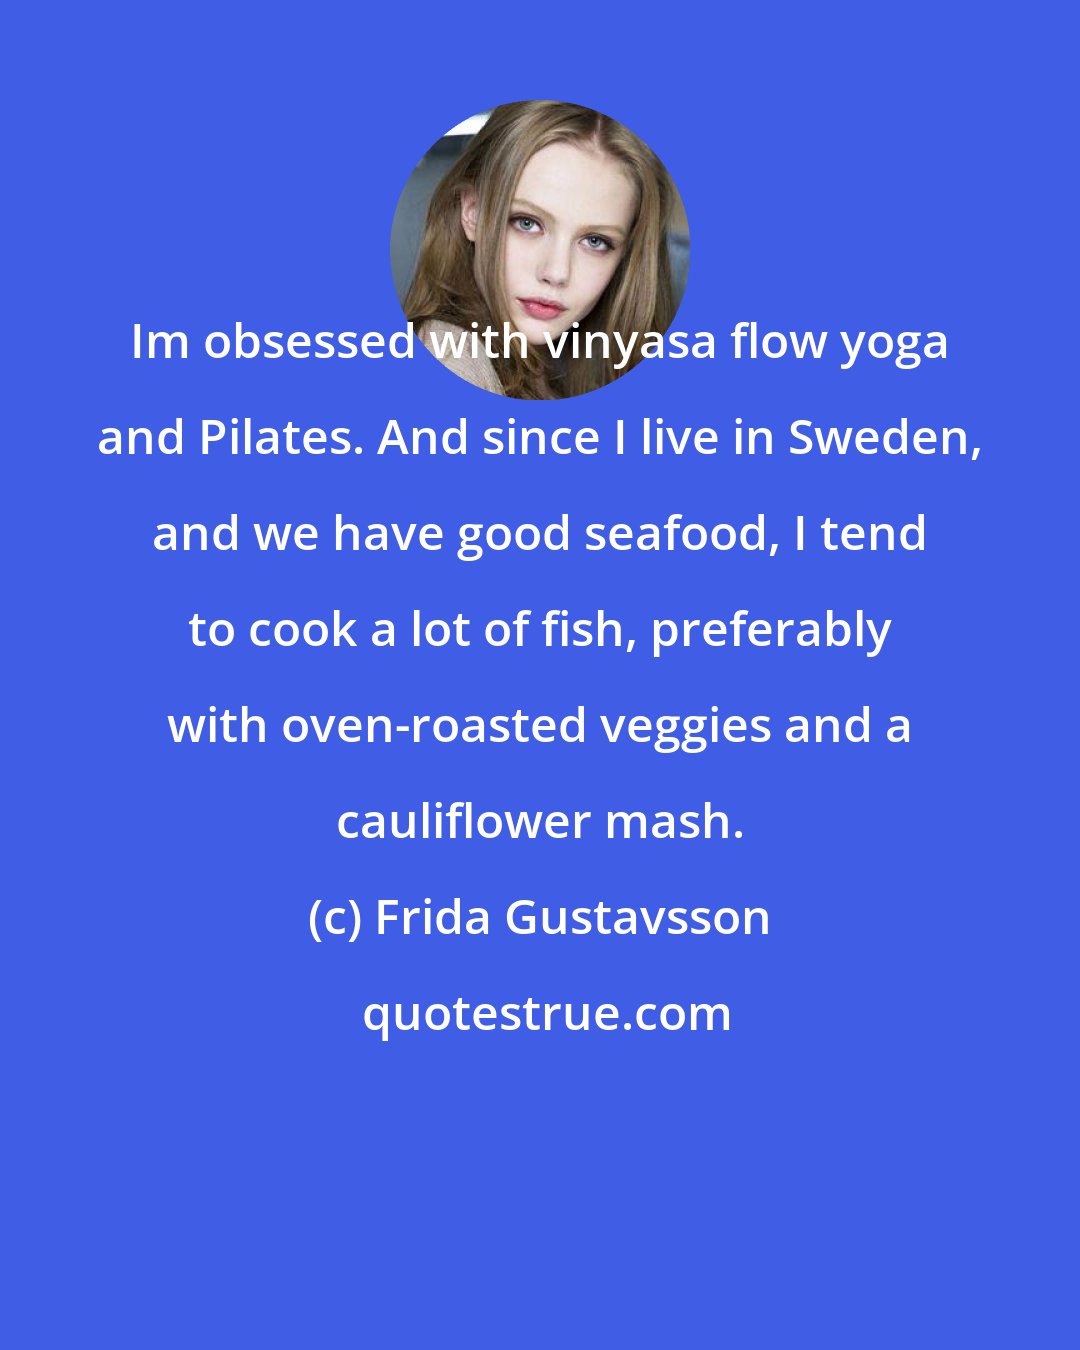 Frida Gustavsson: Im obsessed with vinyasa flow yoga and Pilates. And since I live in Sweden, and we have good seafood, I tend to cook a lot of fish, preferably with oven-roasted veggies and a cauliflower mash.